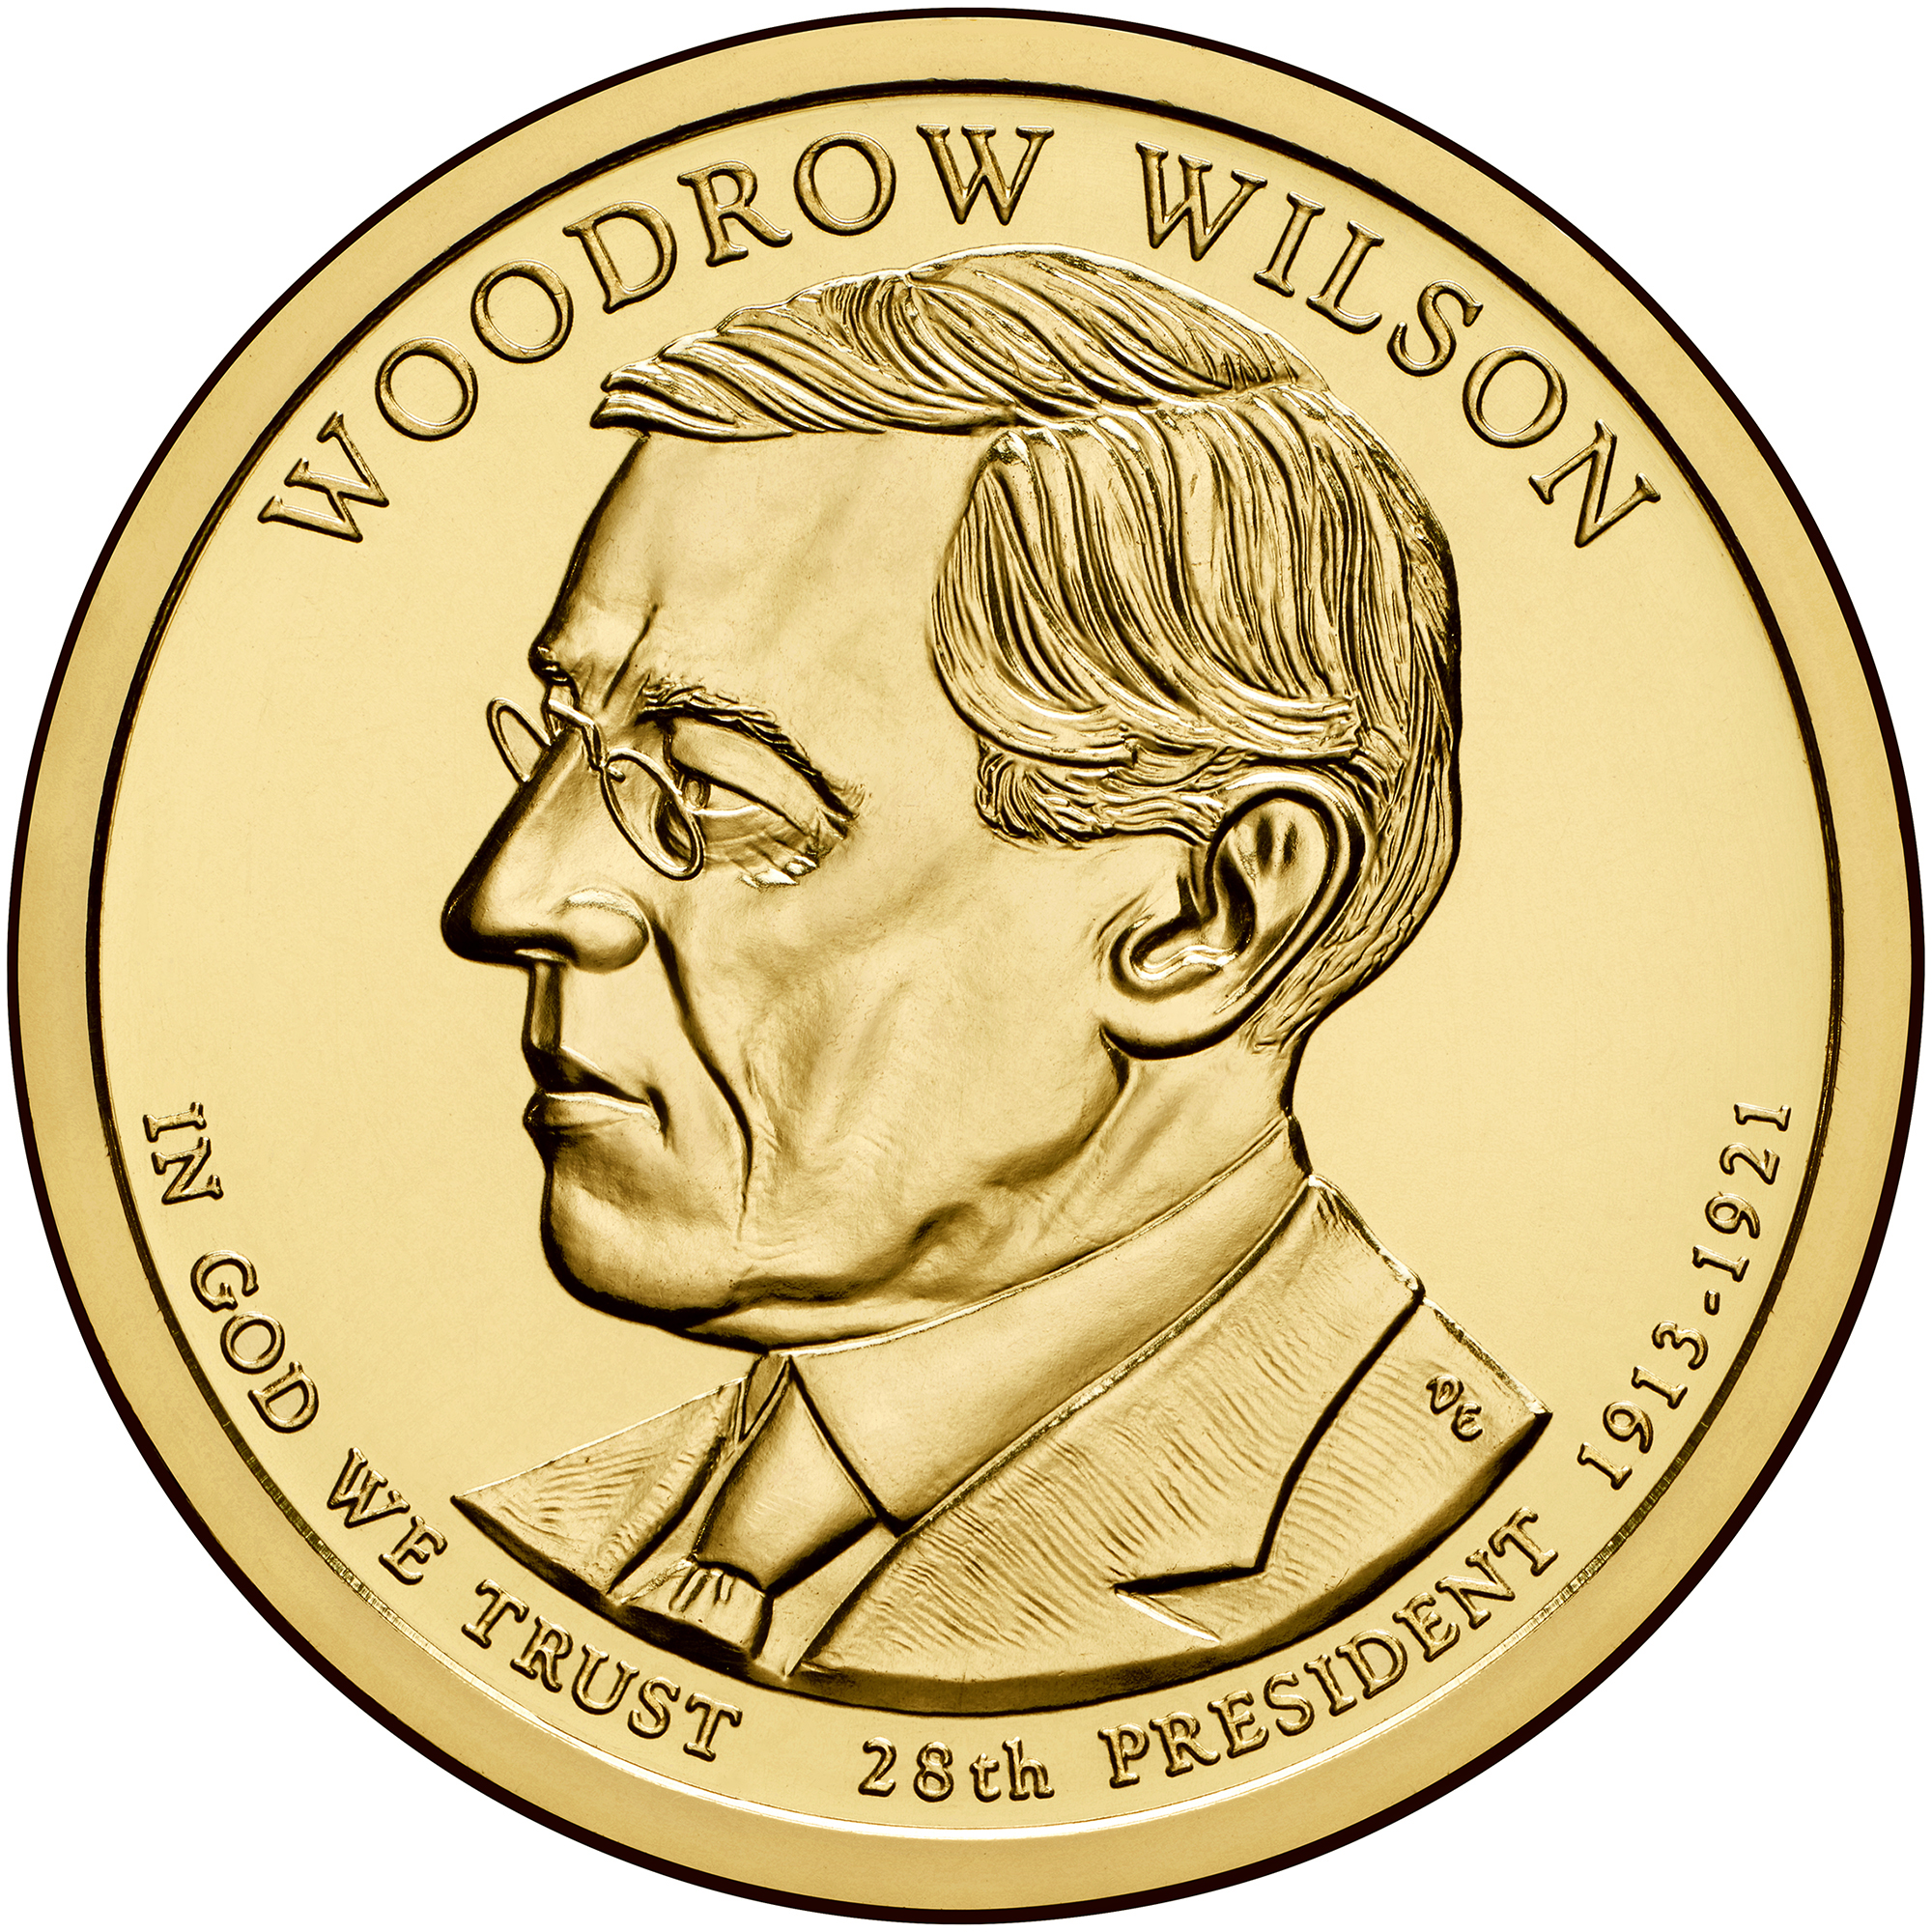 2013 Presidential Dollar Coin Woodrow Wilson Uncirculated Obverse